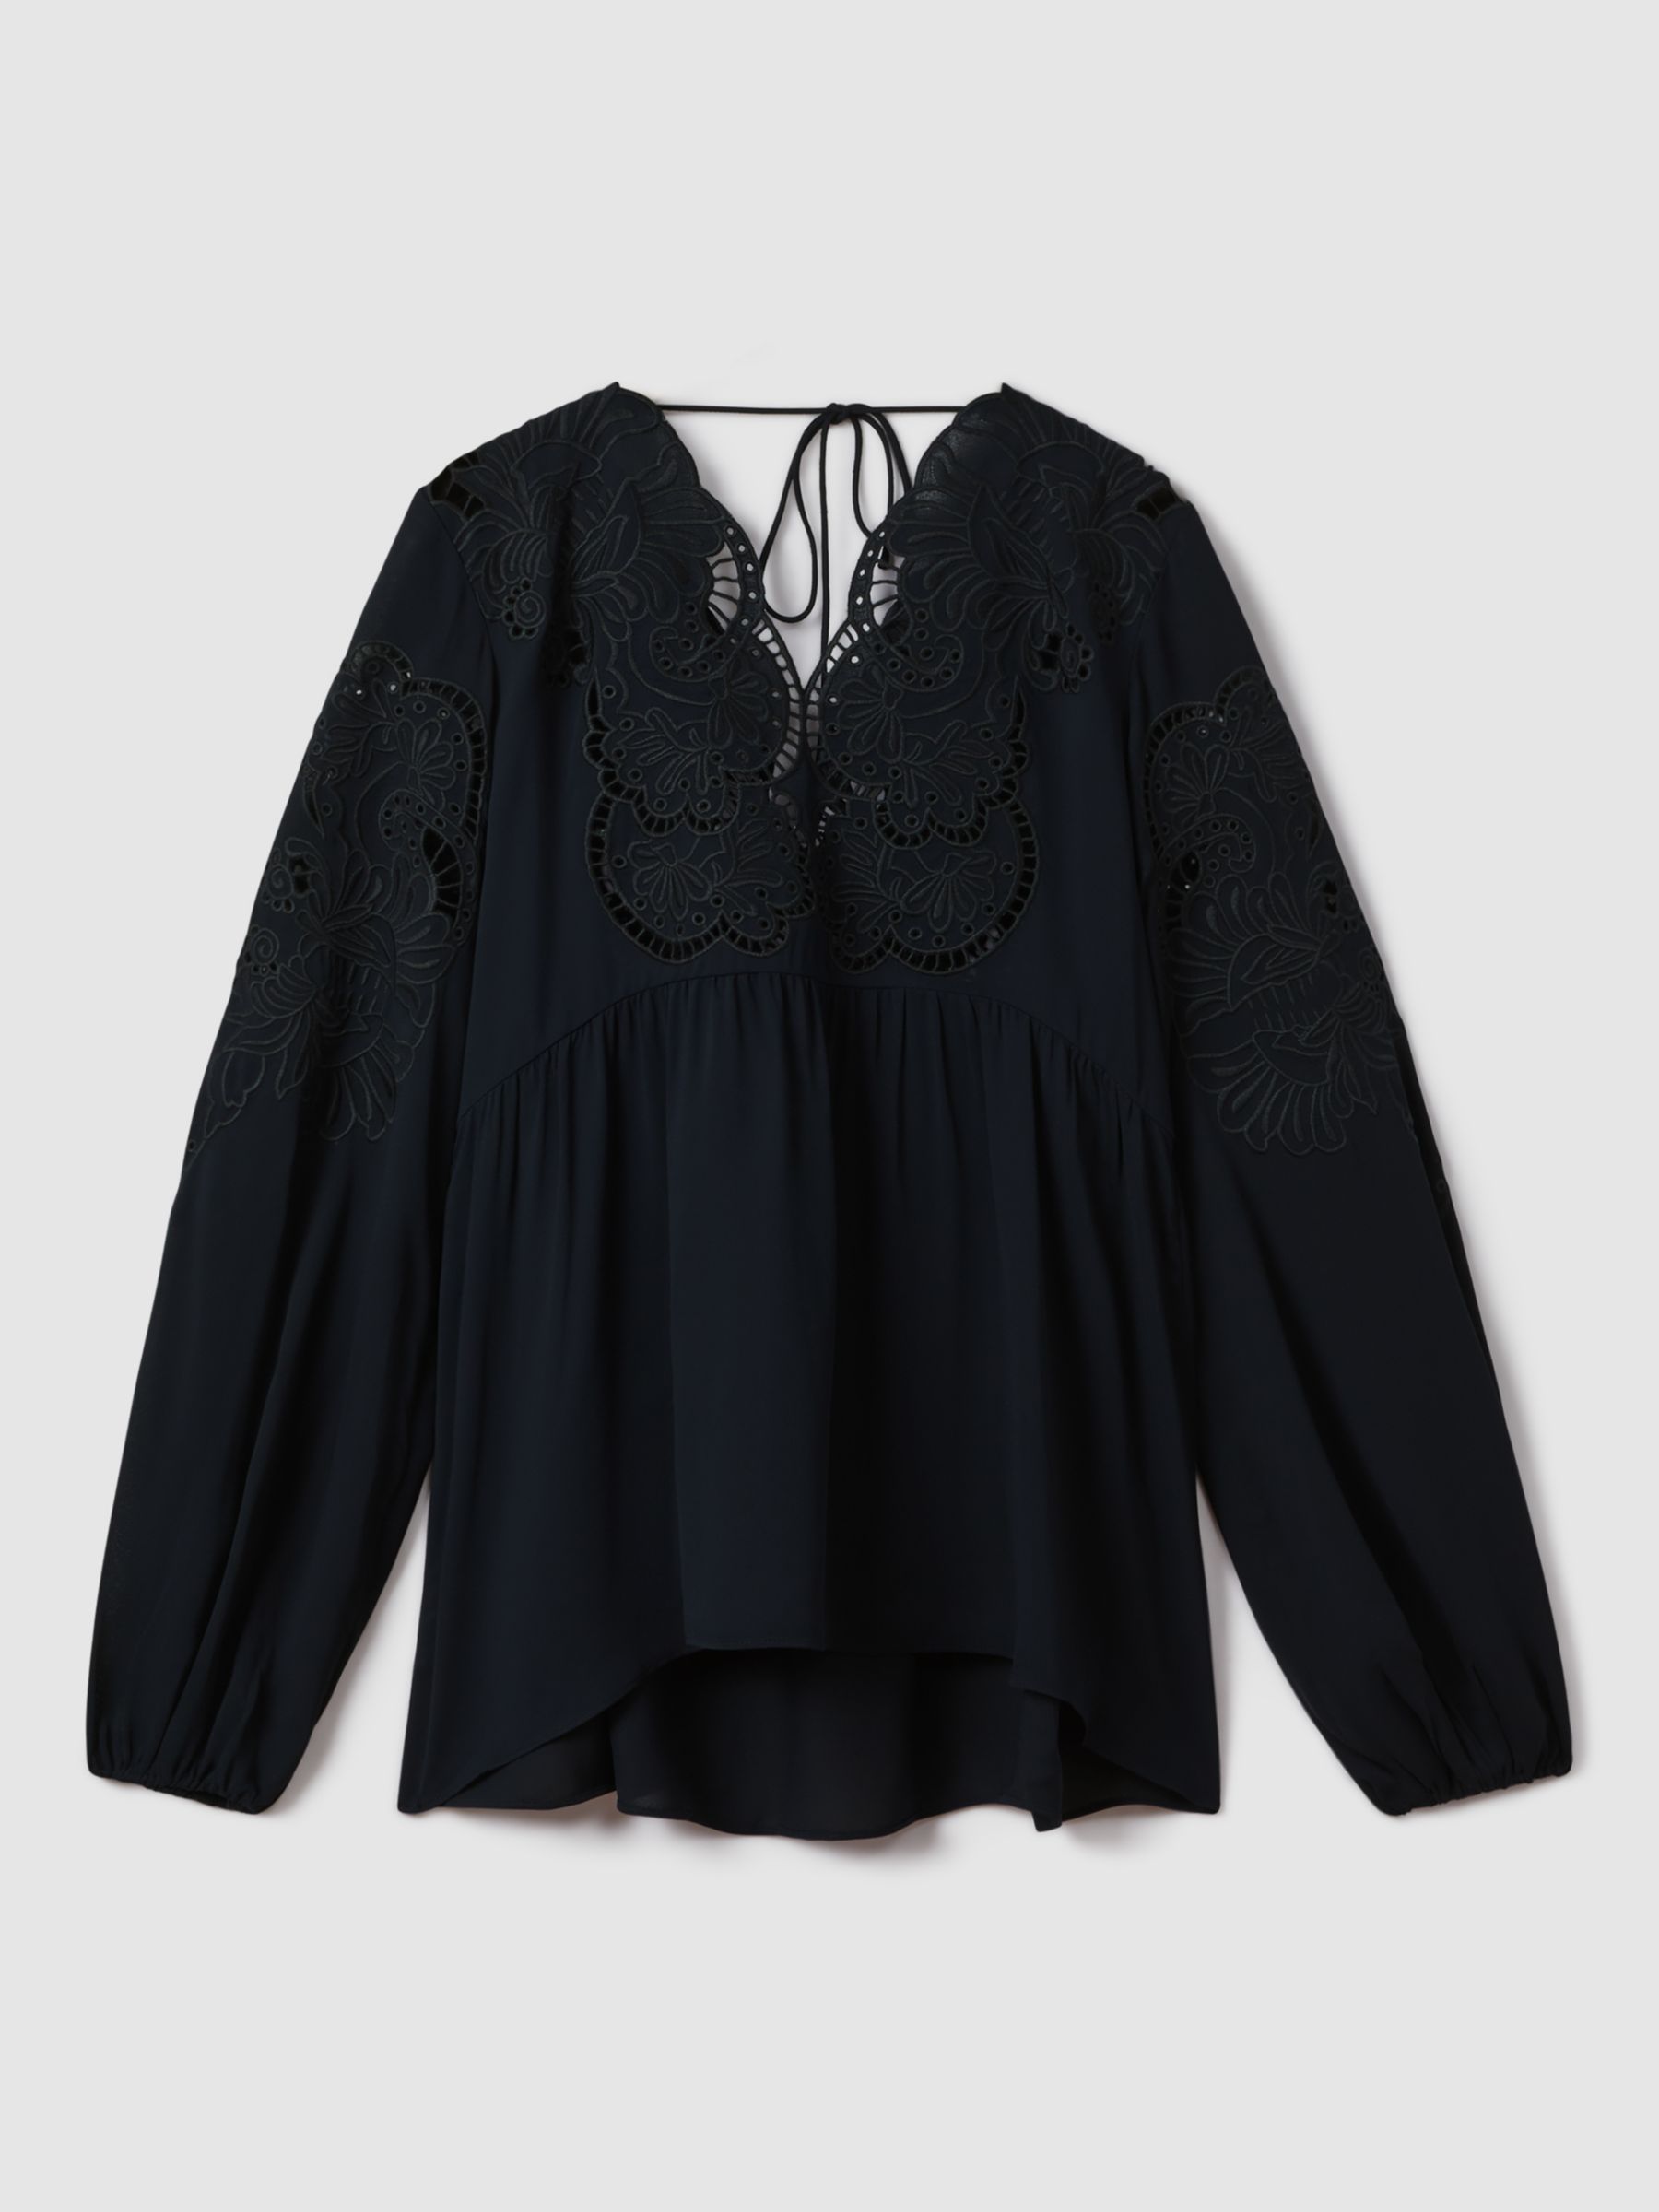 Buy Reiss Noa Lace Insert Blouse, Navy Online at johnlewis.com